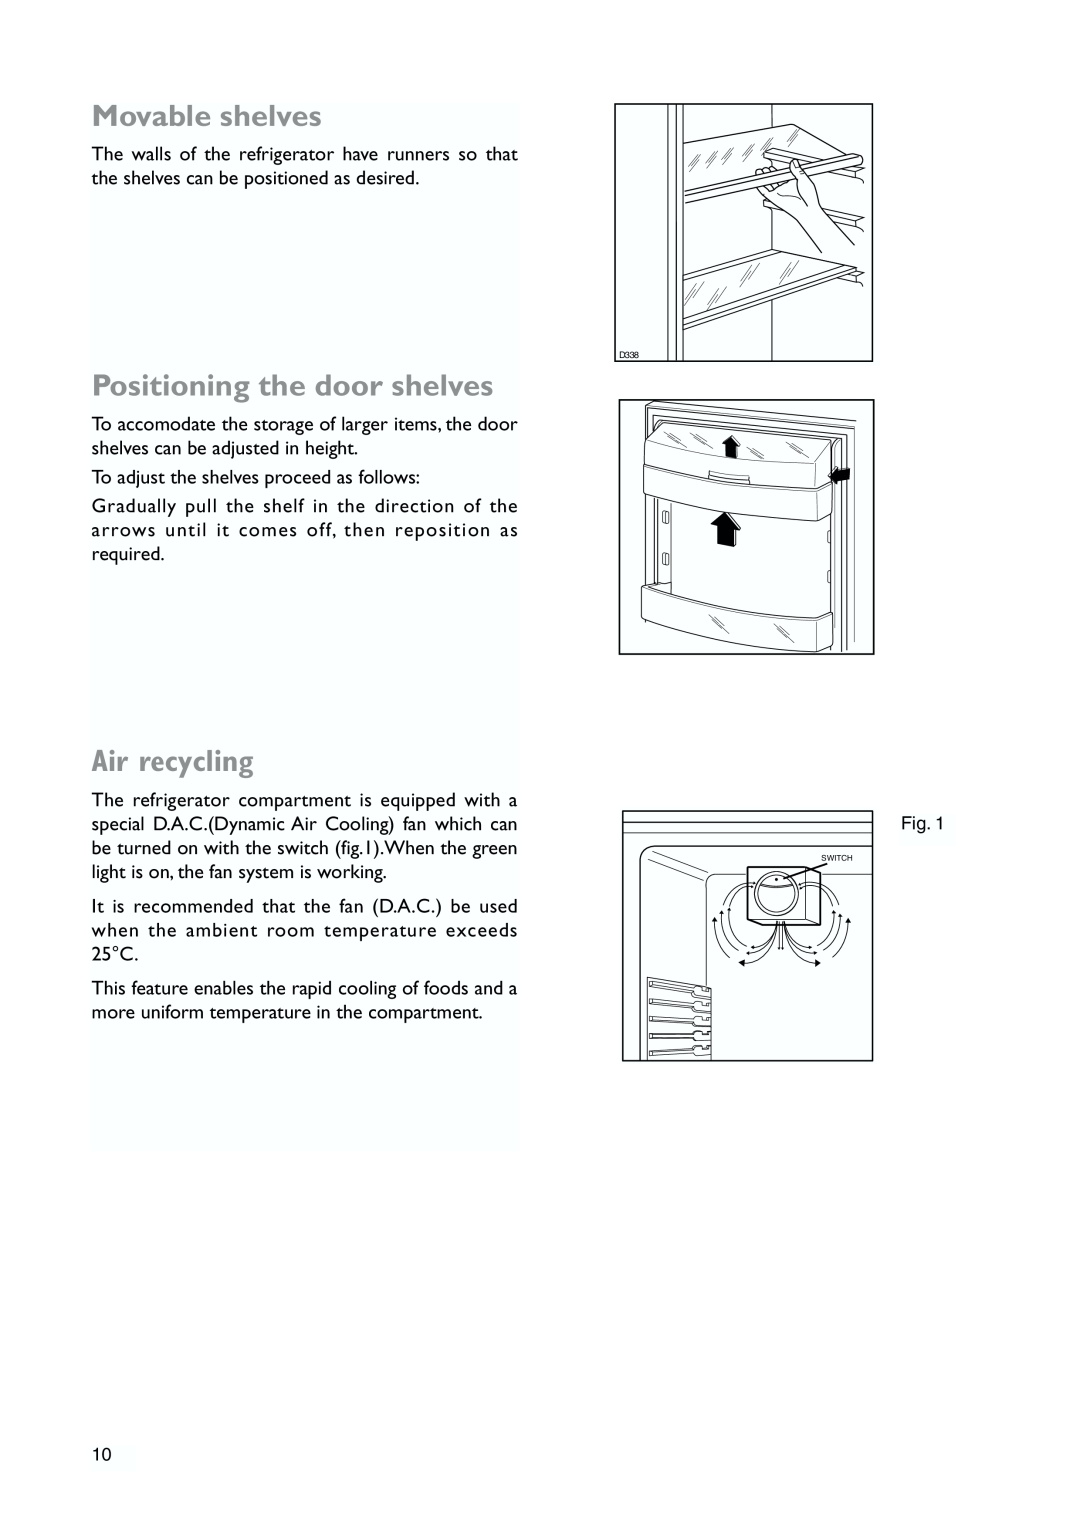 John Lewis JLWFF1101 instruction manual Movable shelves, Positioning the door shelves, Air recycling 